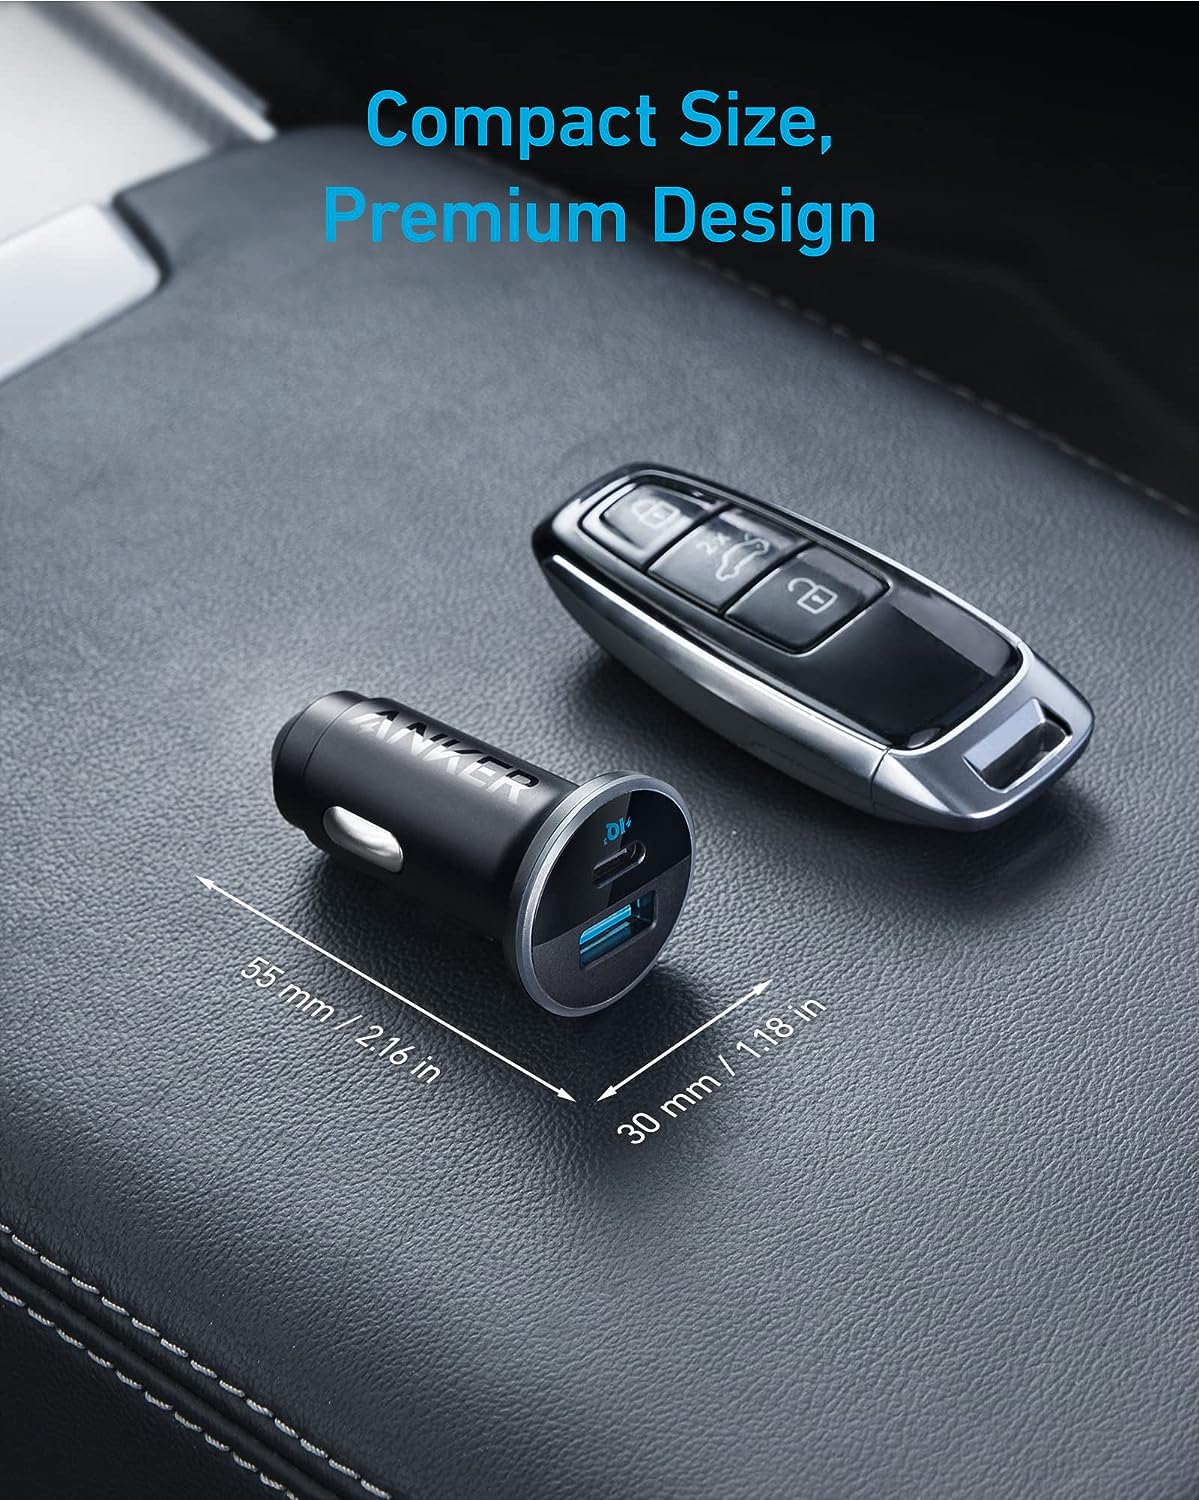 ANKER USB C Car Charger Adapter / 52.5W / USB Charger/ Fast Charging for iPhone - Black